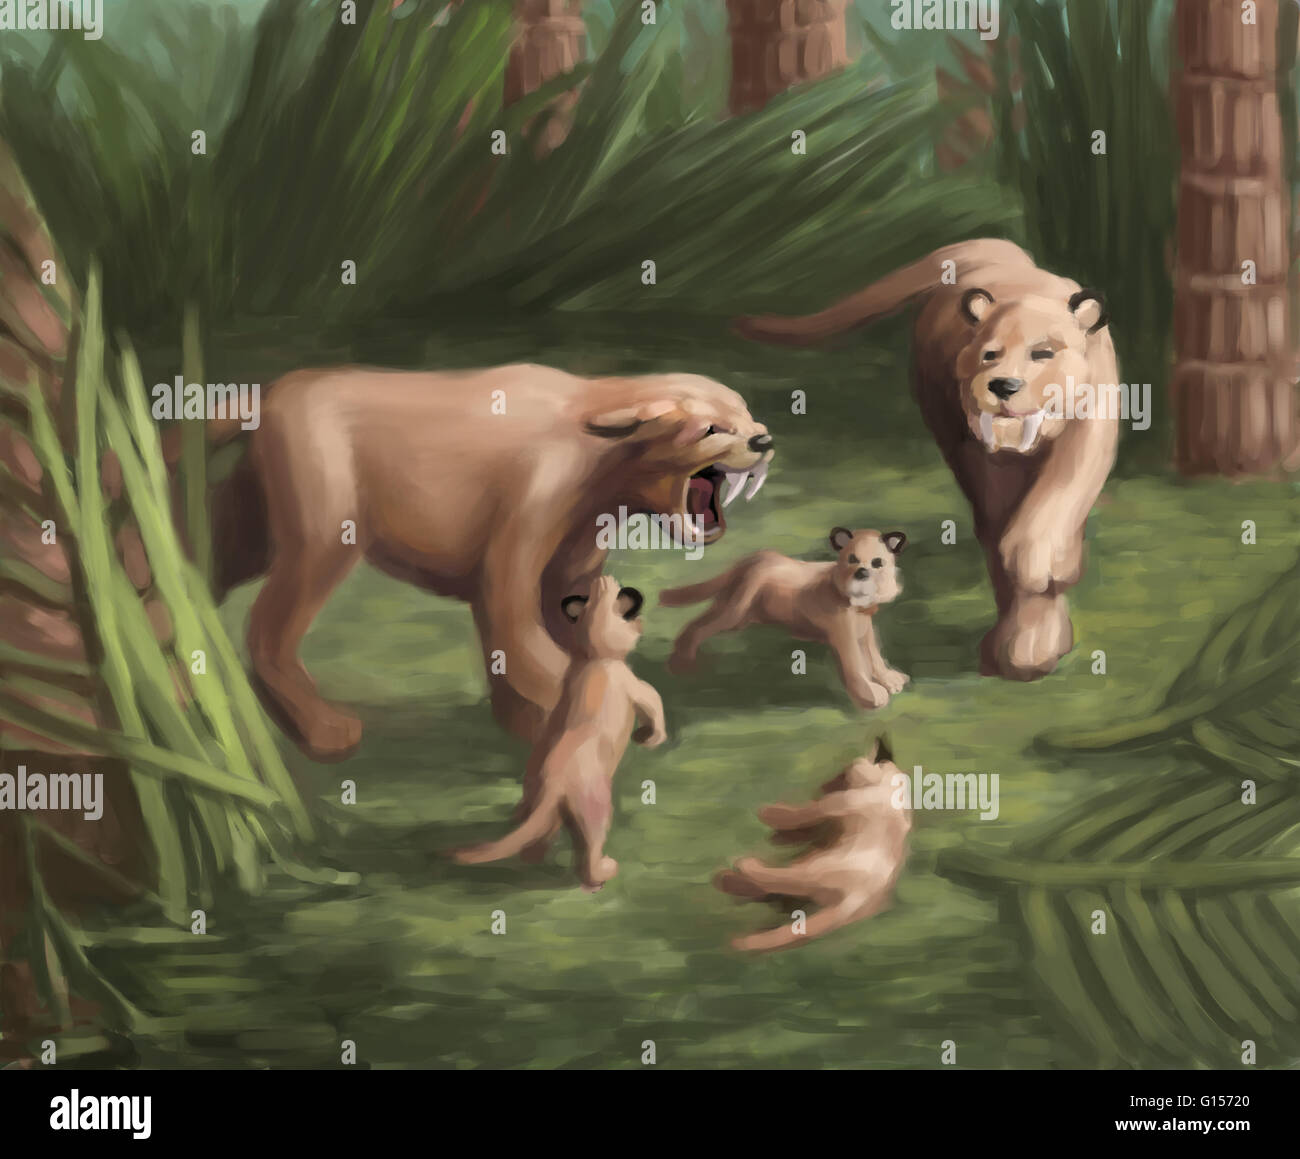 Illustration of saber-toothed cat family. The Smilodon lived during the late Pleistocene Age (Ice Age). It used its powerful forelimbs to ambush and capture prey, although its most distinctive features were the dramatic canines, serrated on the back edges Stock Photo